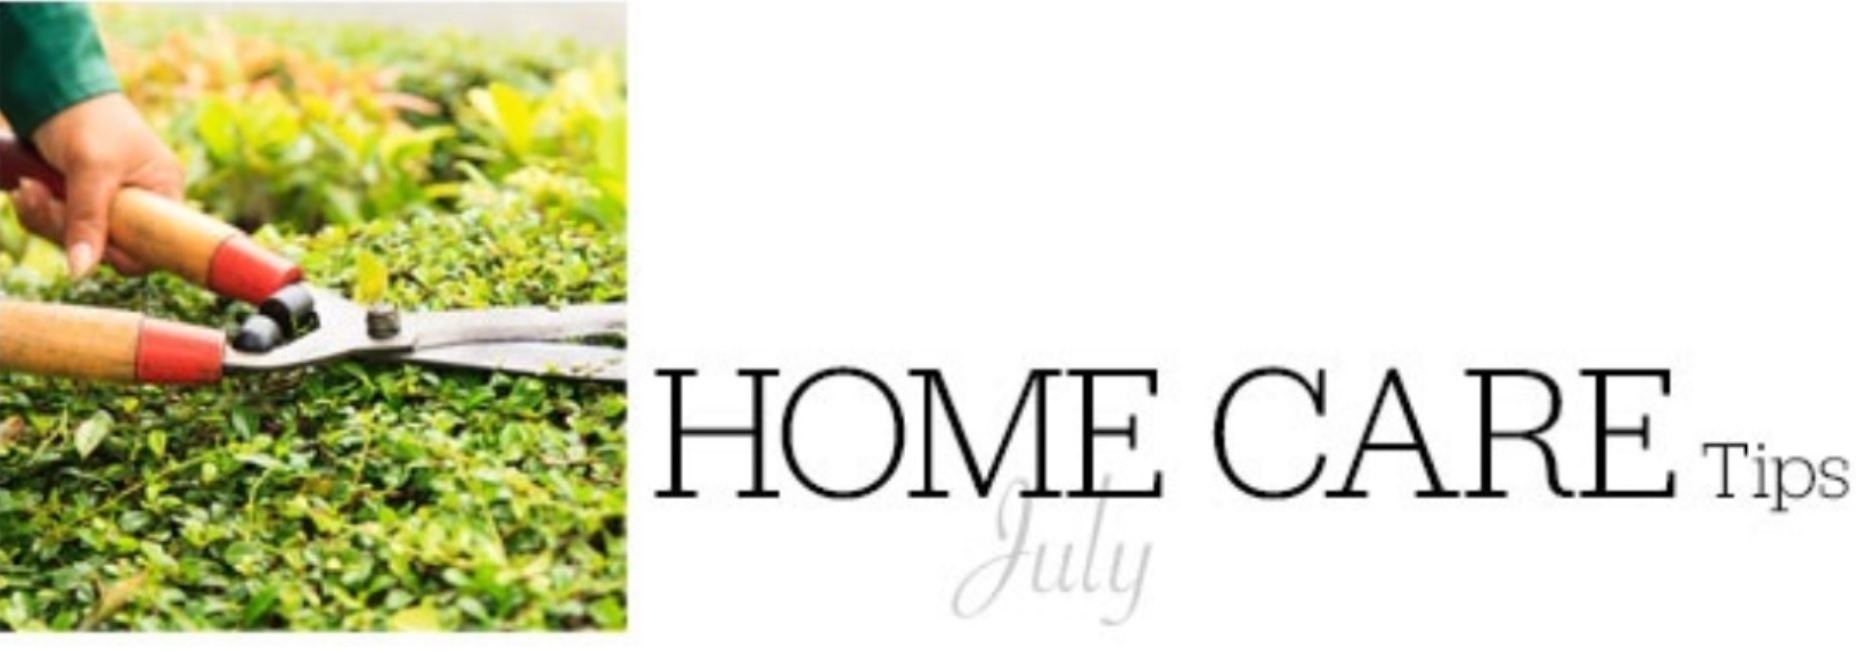 24 Home Care Tips For July To Keep Your Home In Tip-Top Shape